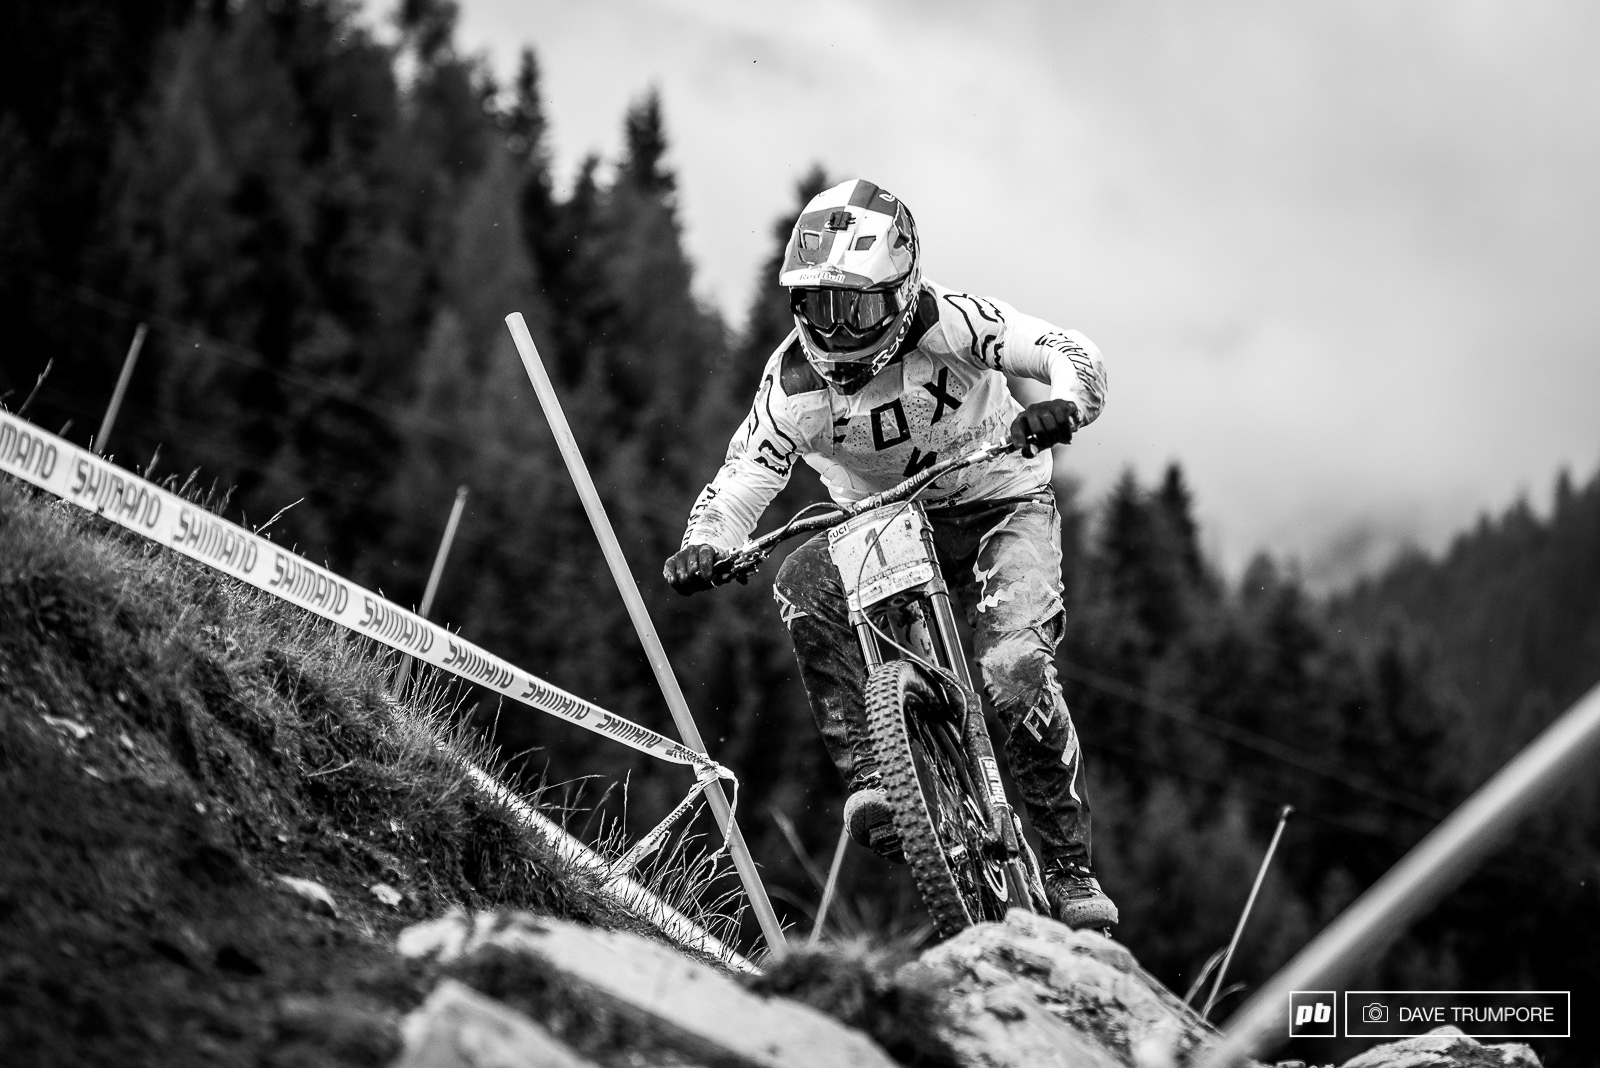 After disappointment in Fort William Finn Iles was back on the top step again here in Leogang.